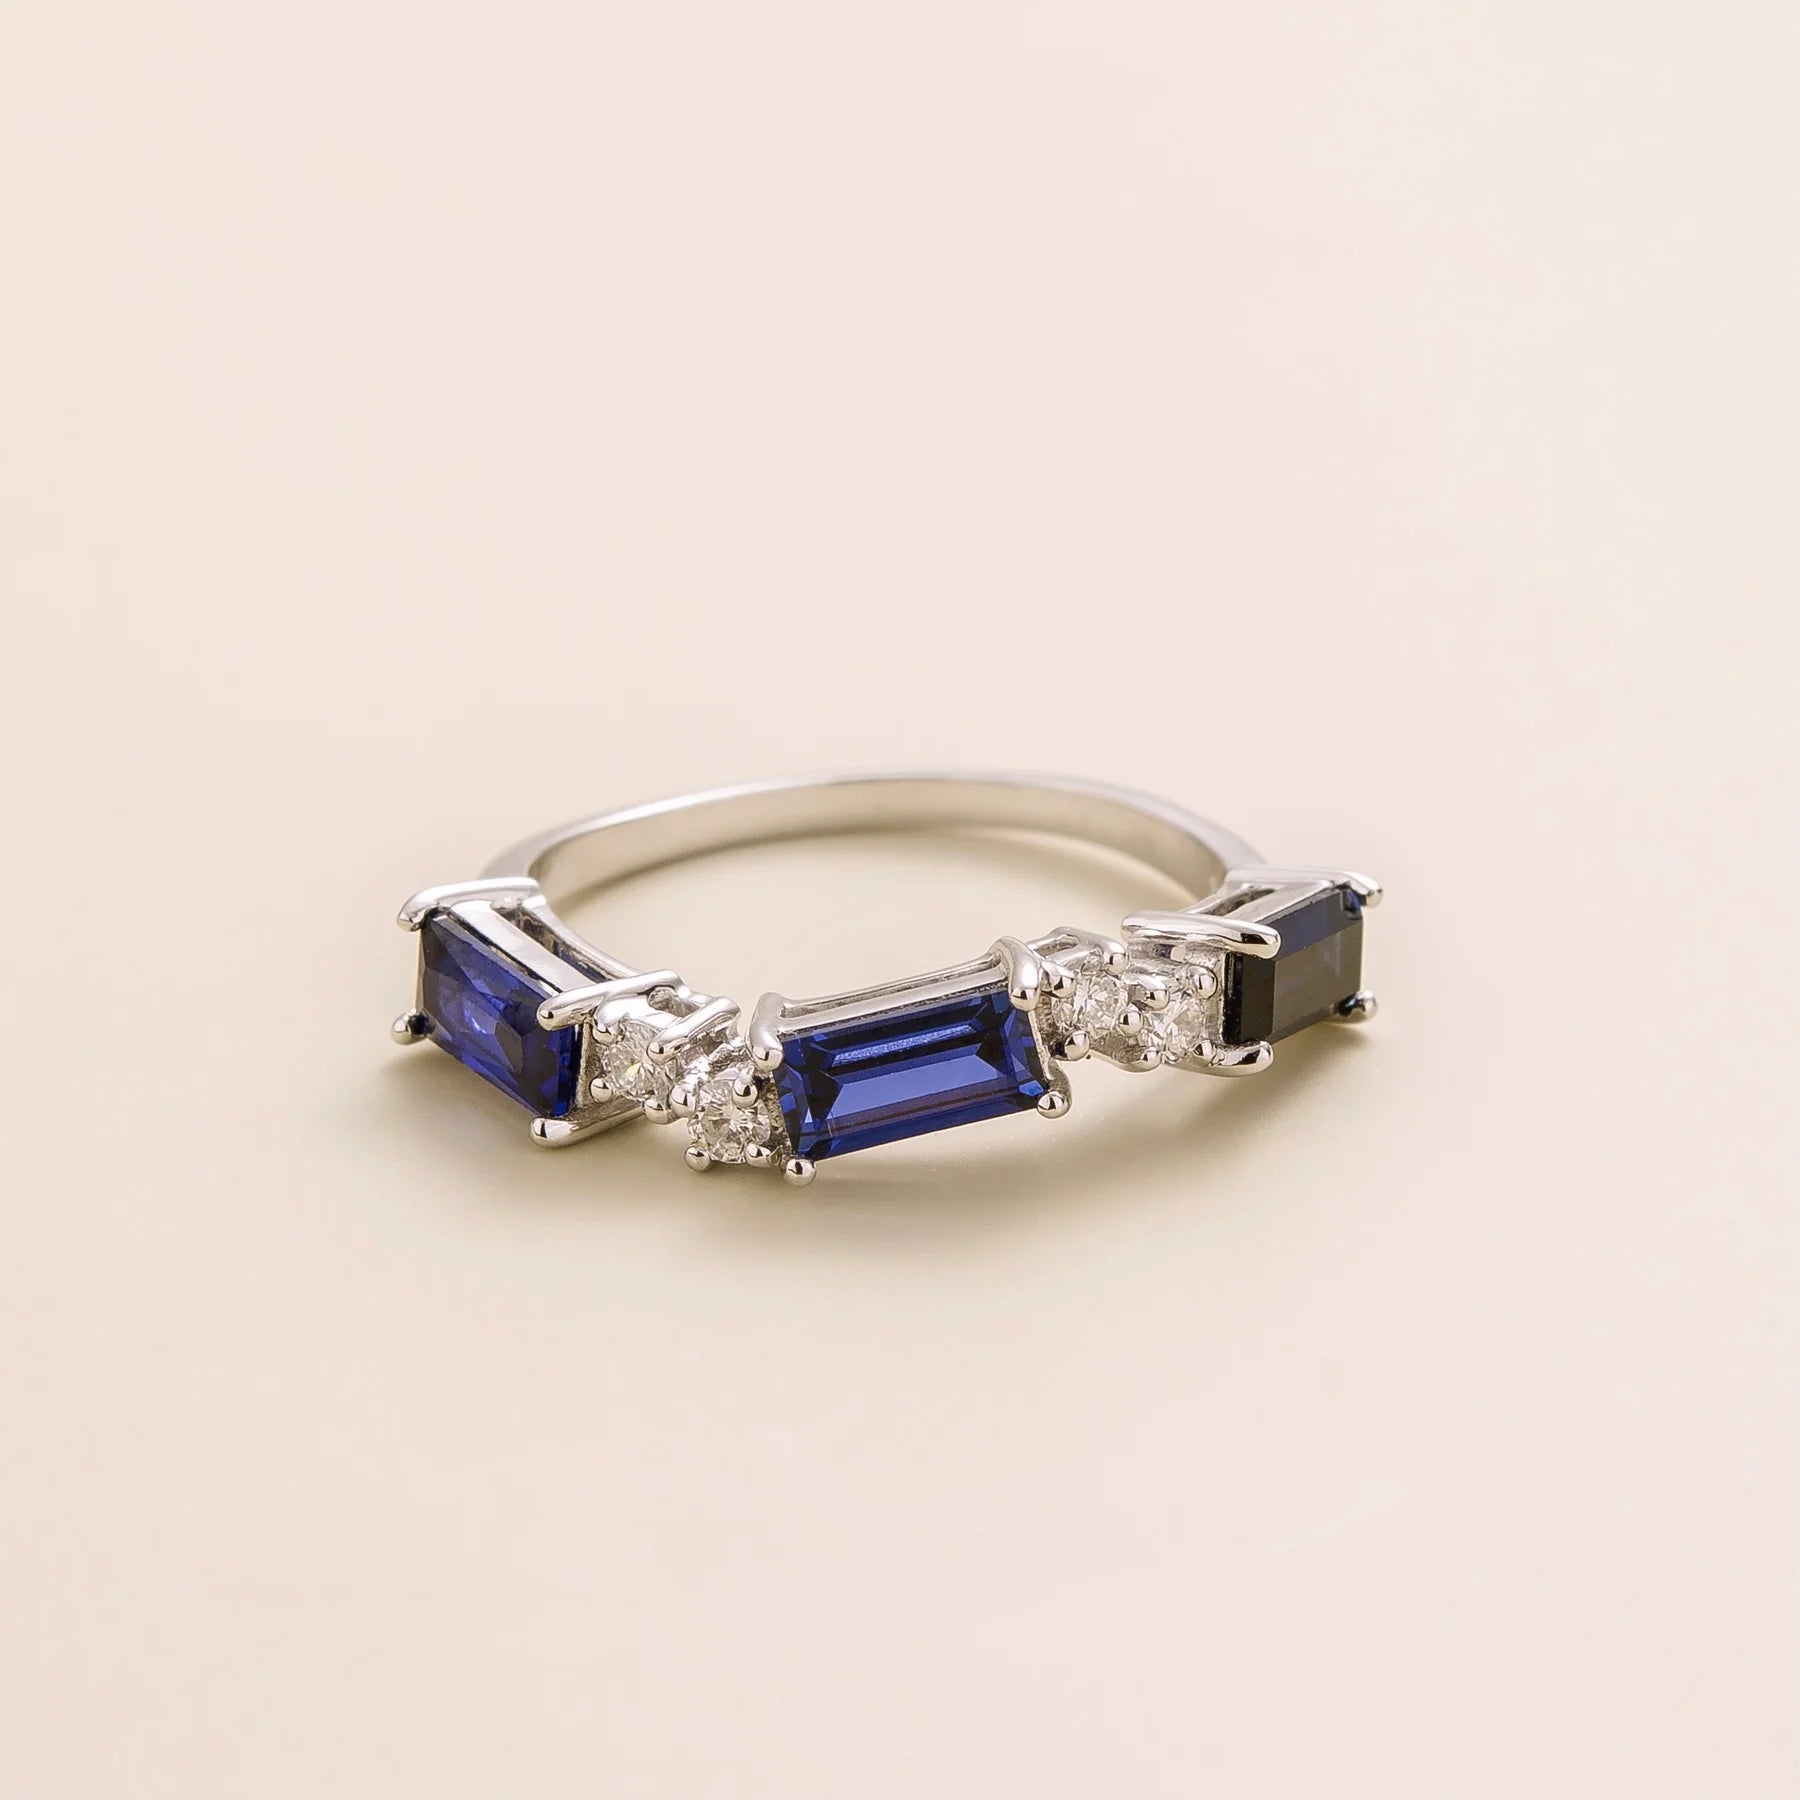 Forma white gold ring set with Blue Sapphire and Diamond Bespoke Jewellery From London